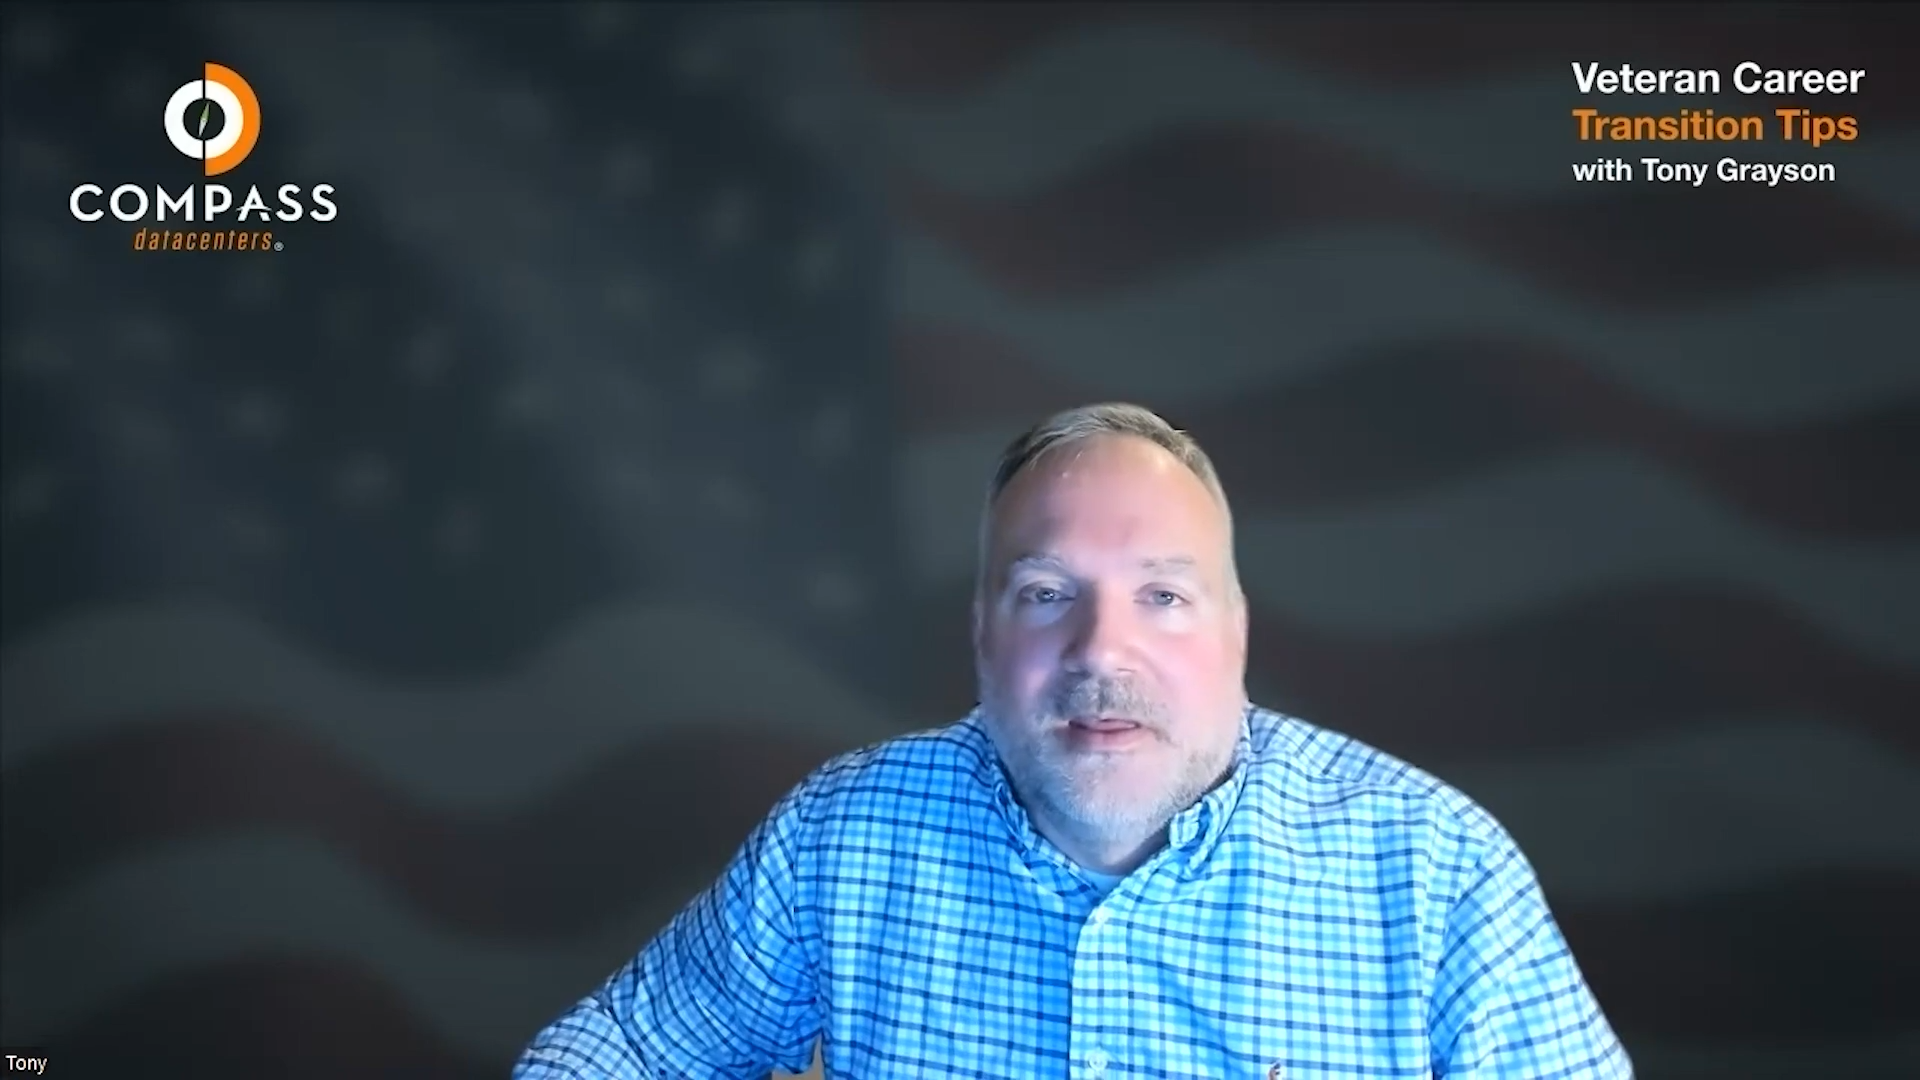 A person is in a video call with a virtual background that reads "COMPASS datacenters." Text on screen says "Veteran Career Transition Tips with Tony Grayson."